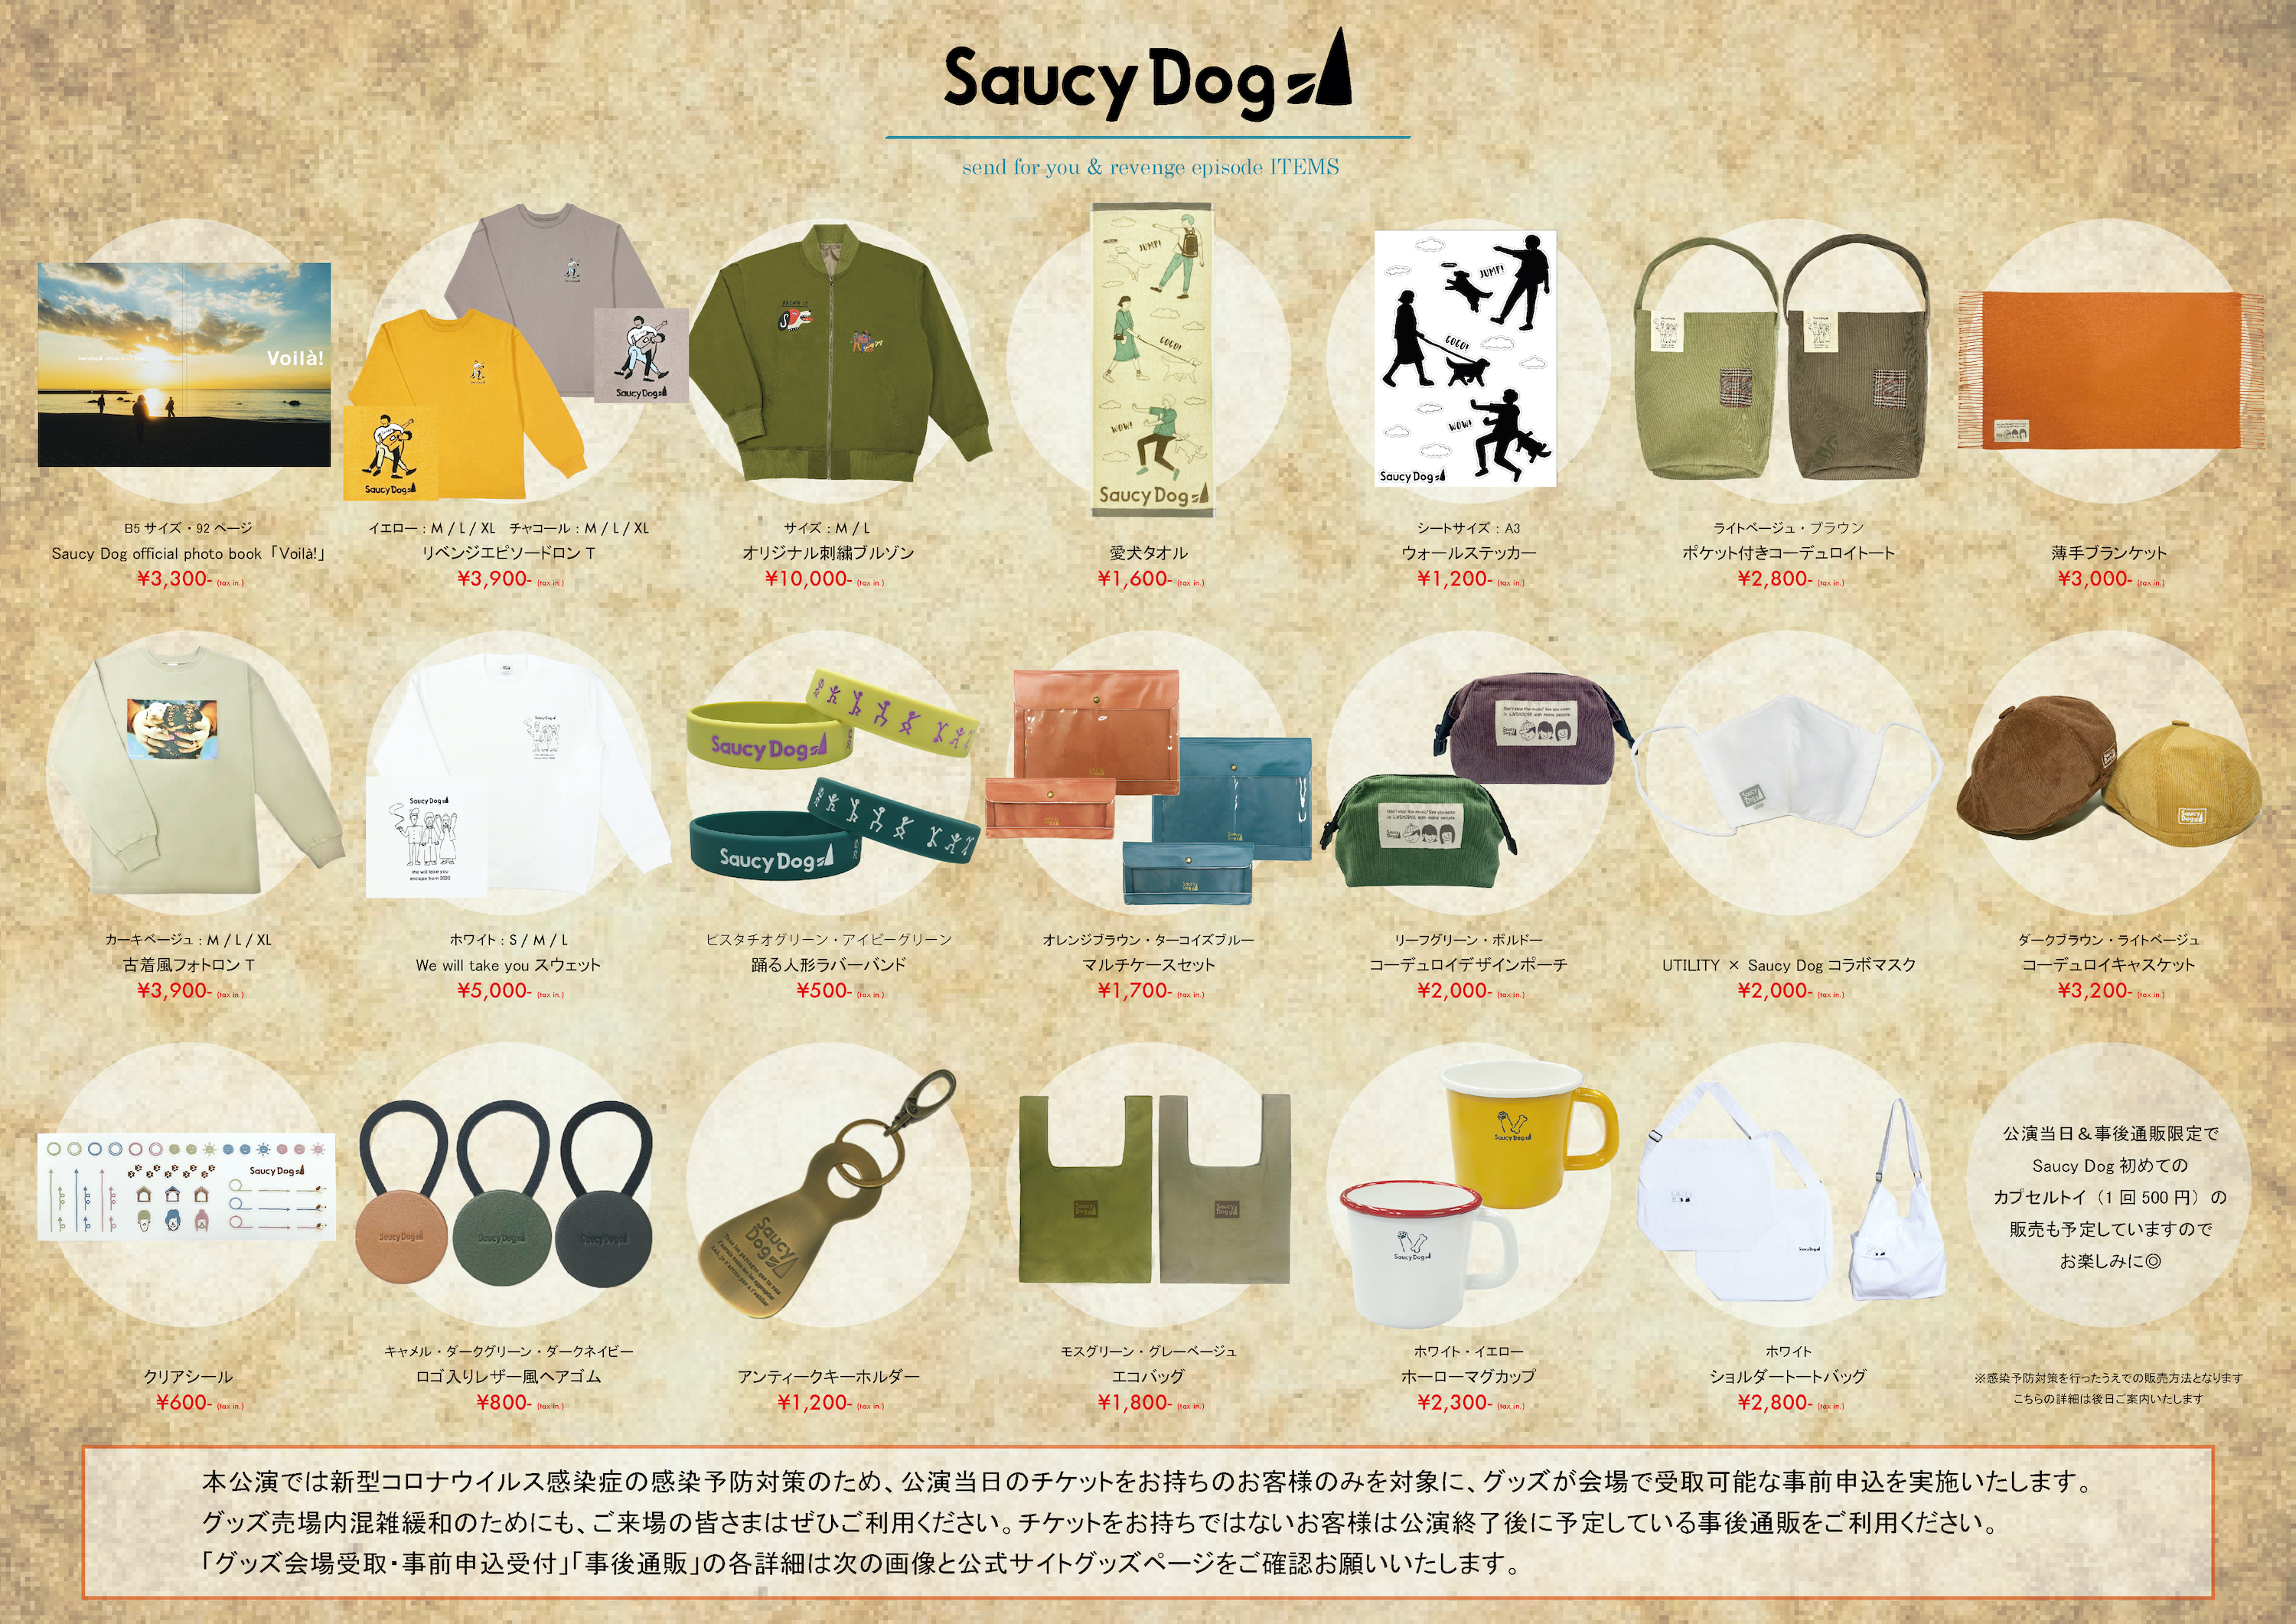 NEW GOODSが登場、明日より予約開始｜Saucy Dog Official Site